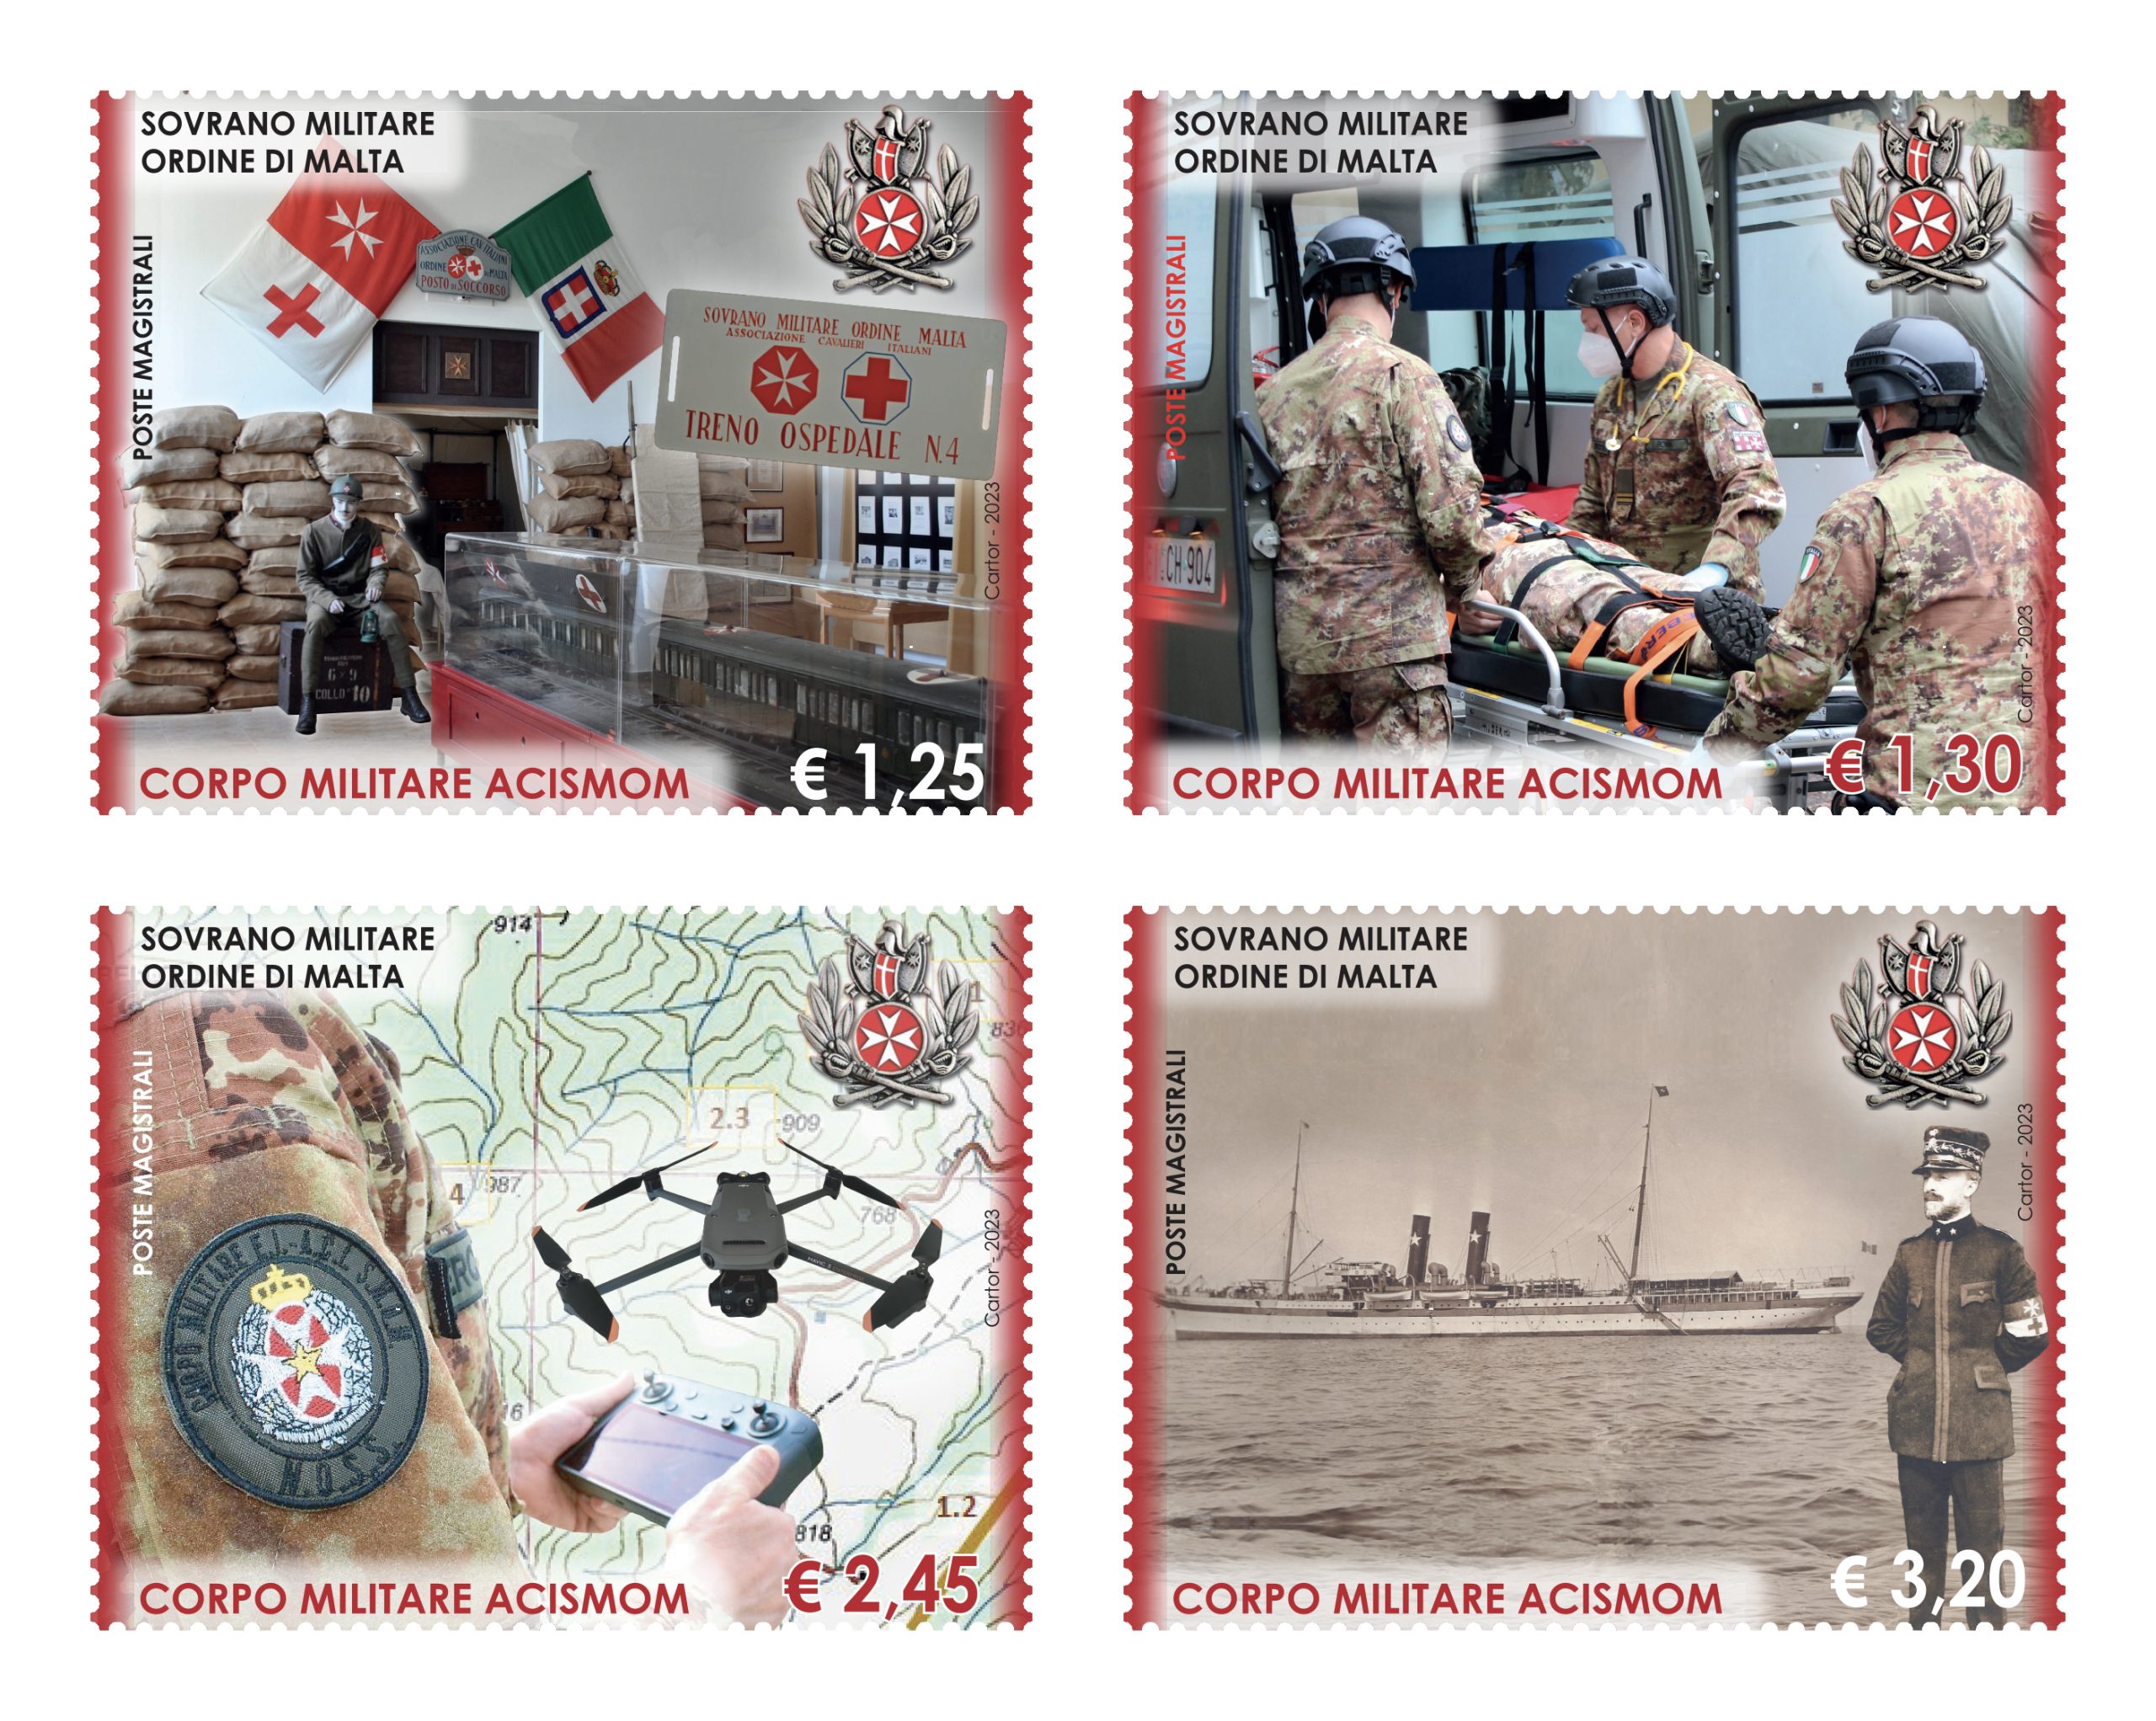 The national institutions – The Military Corps of the Association of the Italian Knights of the Sovereign Military Order of Malta